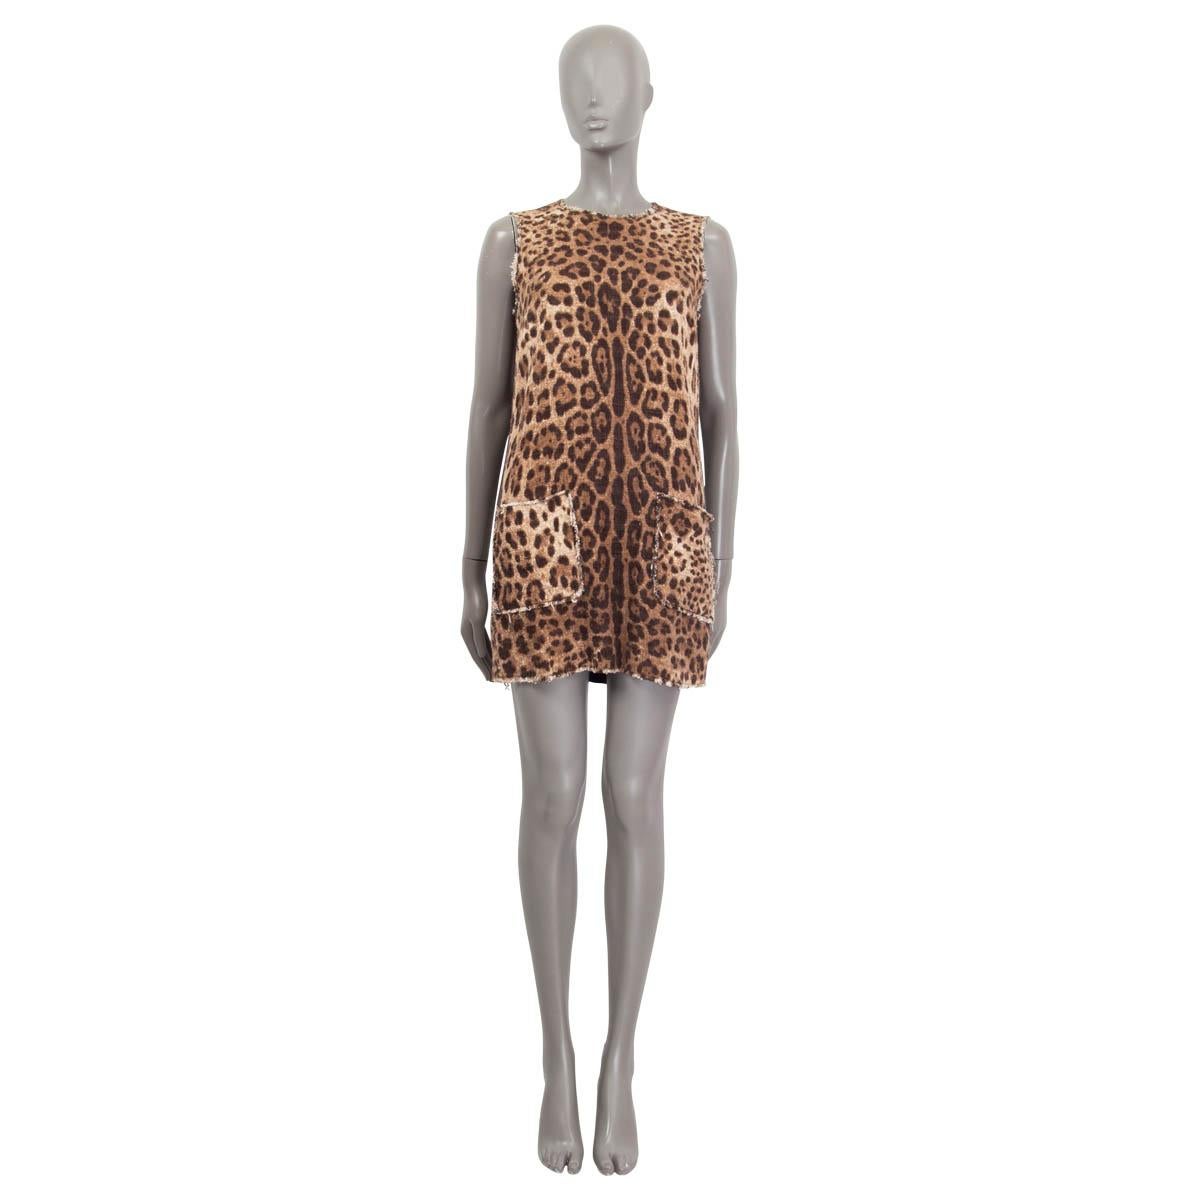 100% authentic Dolce & Gabbana leopard print tweed dress in brown and beige cotton (89%) and viscose (11%). Features two patch pockets on the front. Opens with a concealed zipper and a hook on the back. Lined in black silk (96%) and elastane (4%).